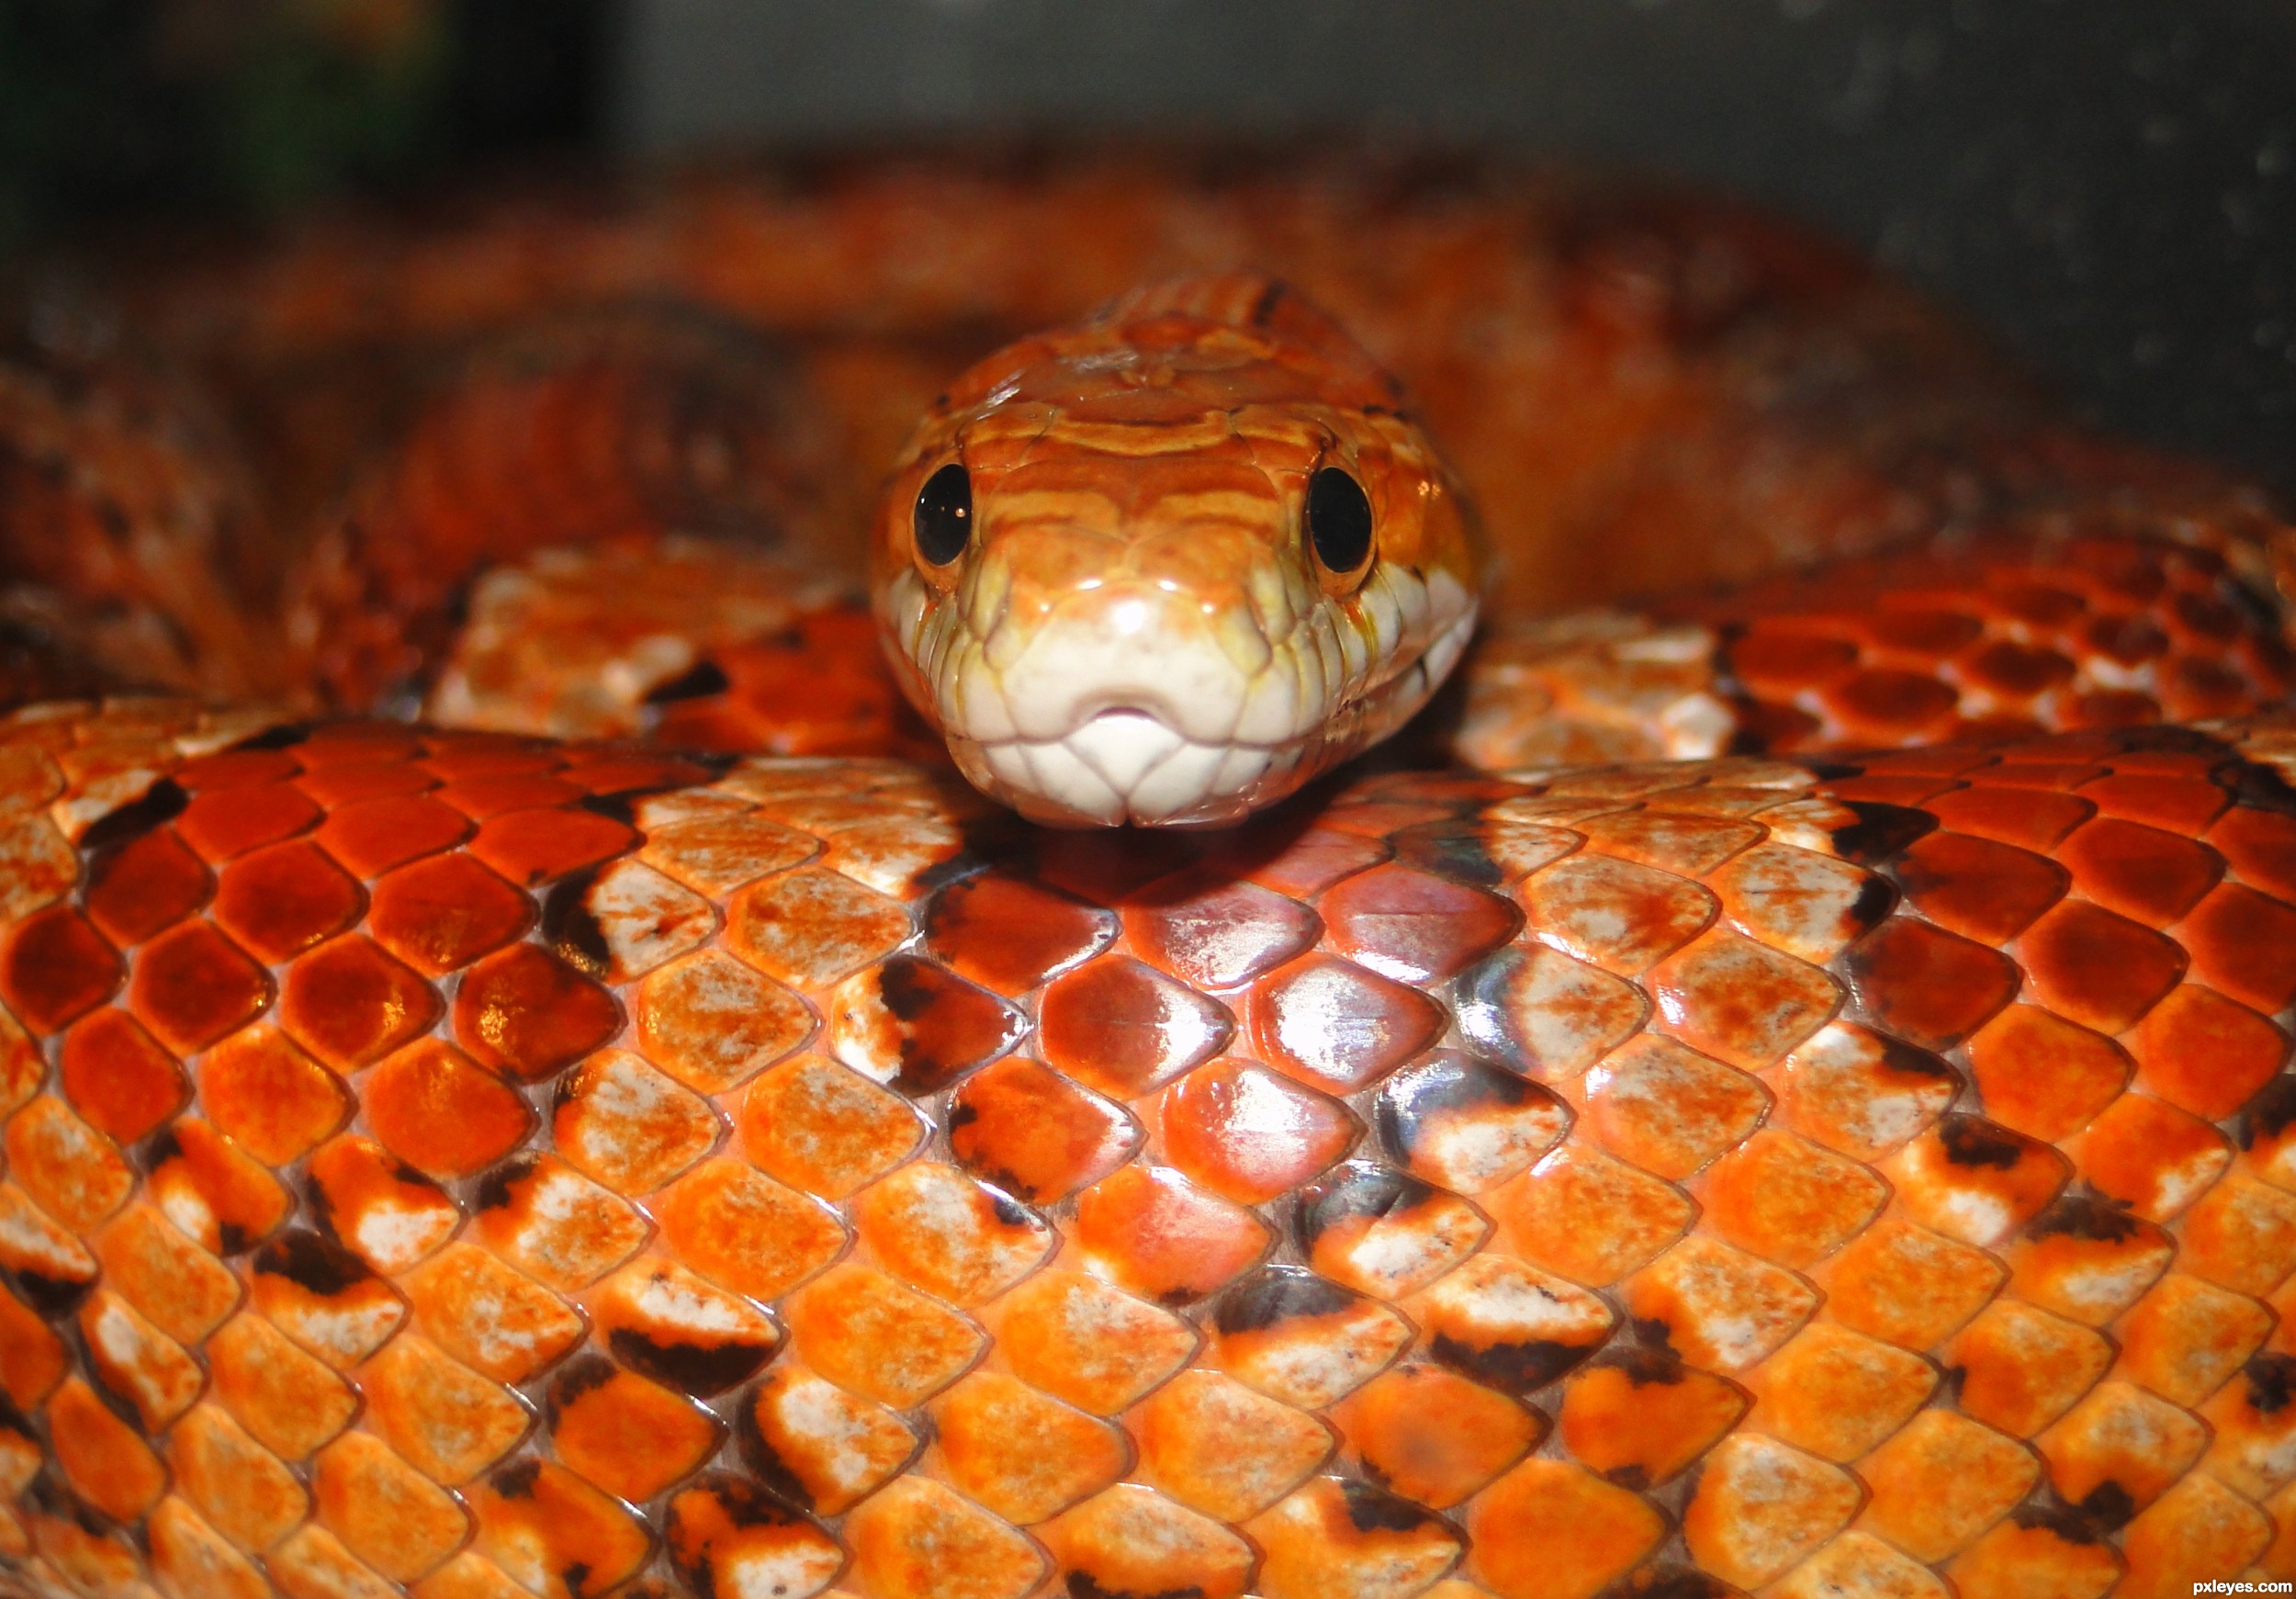 Corn snake picture, by nevena for: snakes photography contest ...